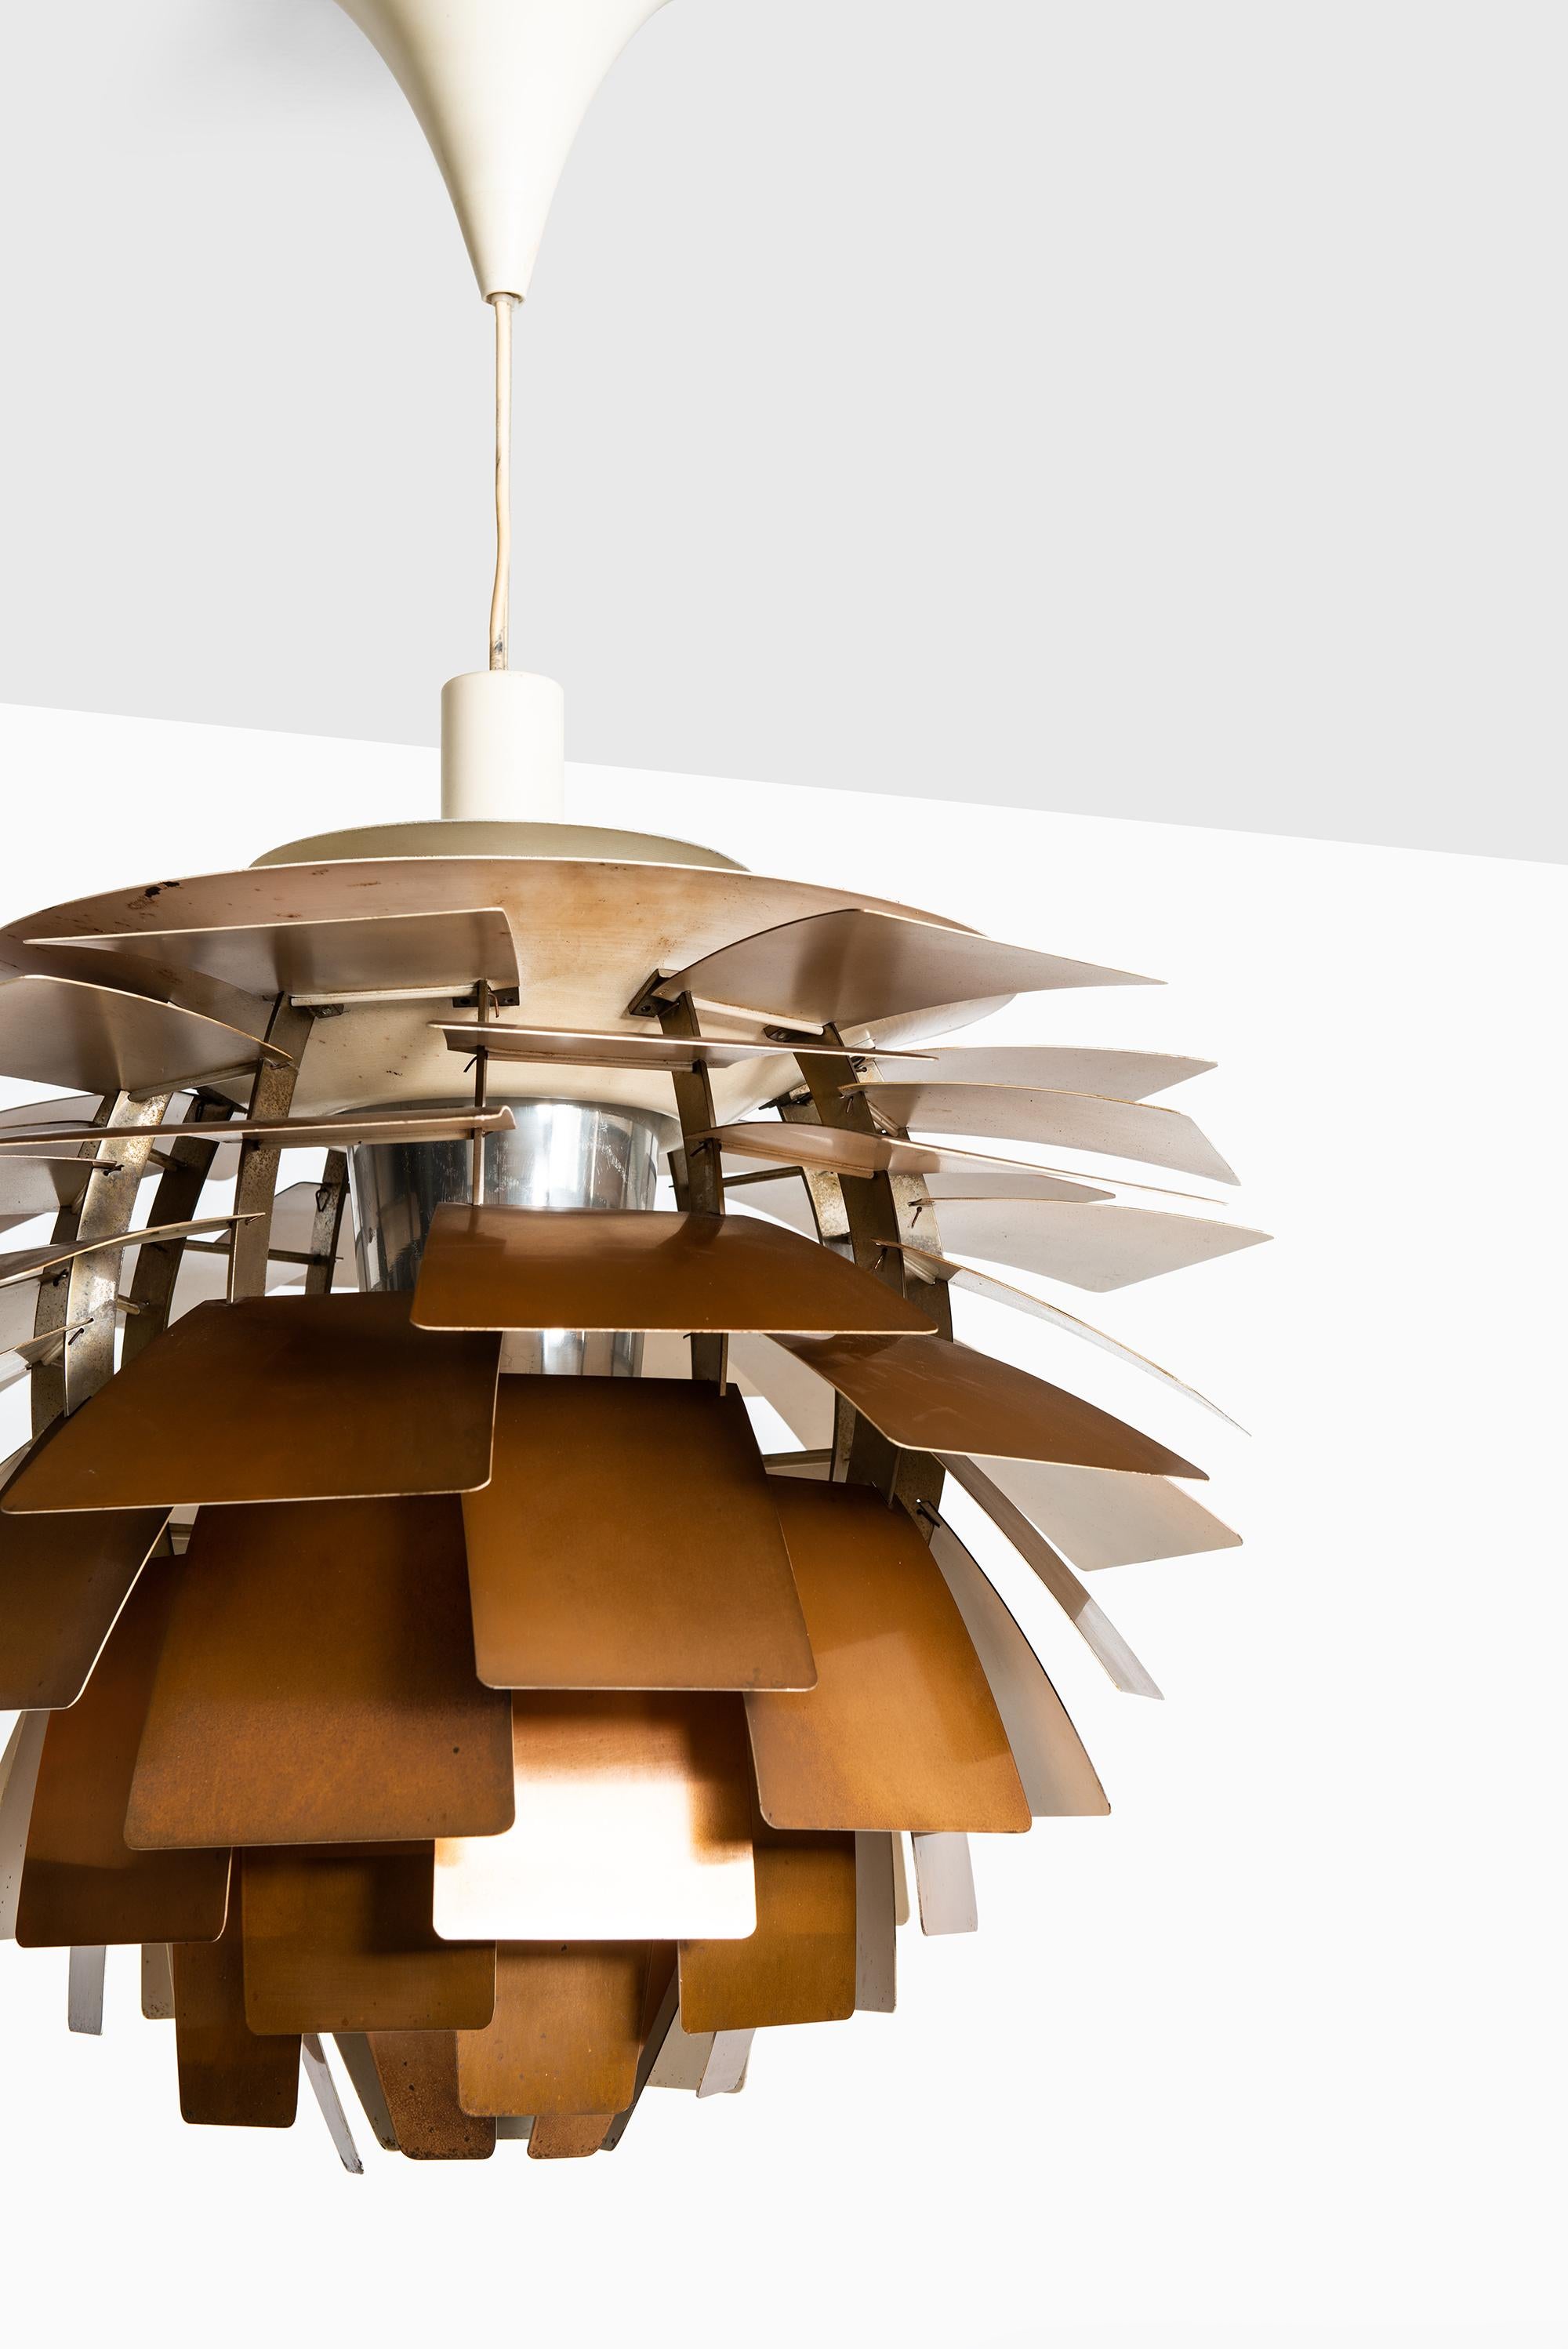 Rare first edition artichoke ceiling lamp designed by Poul Henningsen. Produced by Louis Poulsen in Denmark.